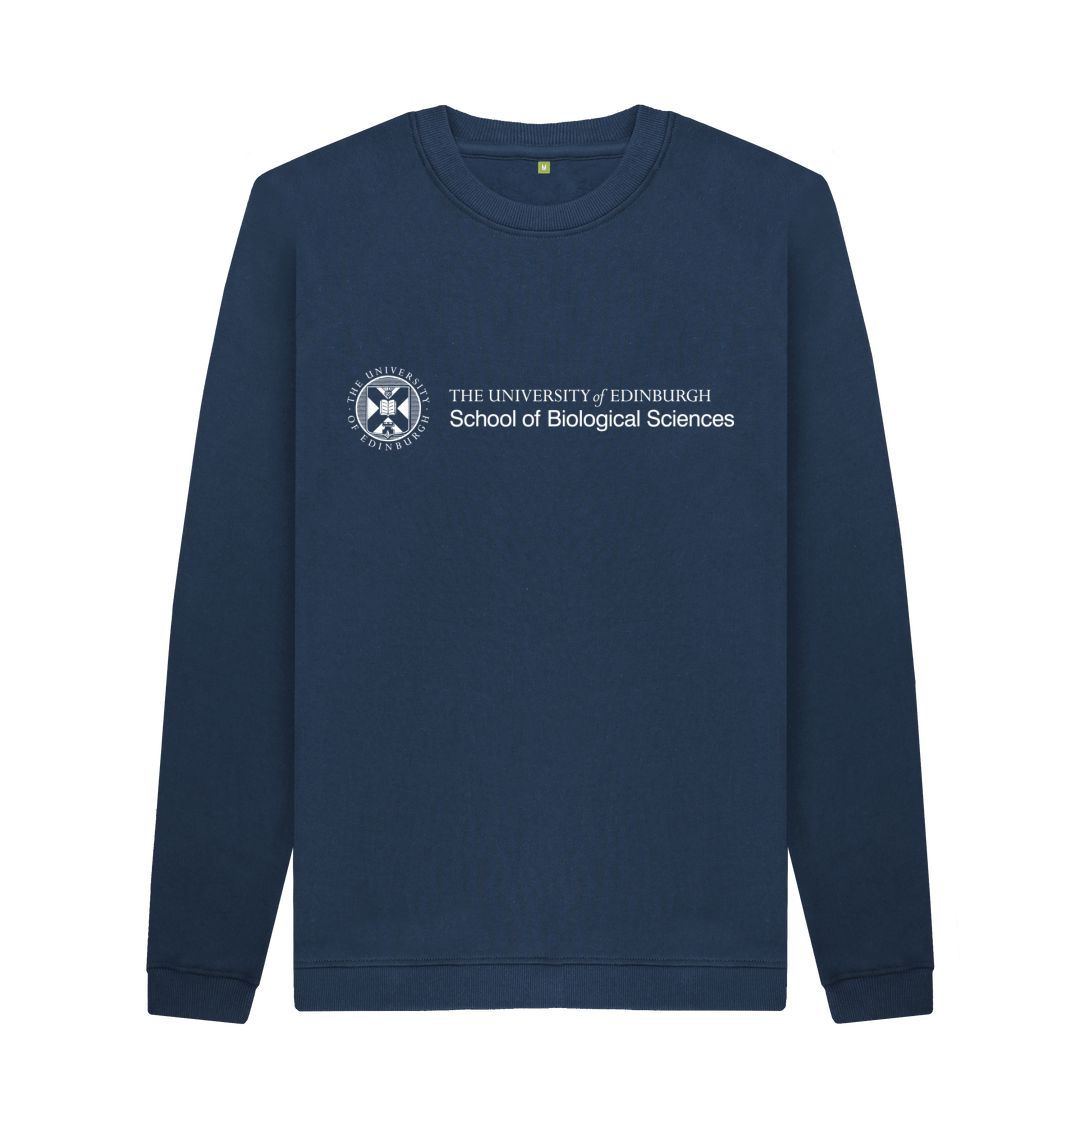 Navy Sweatshirt with white University crest and text that reads ' University of Edinburgh : School of Biological Sciences'